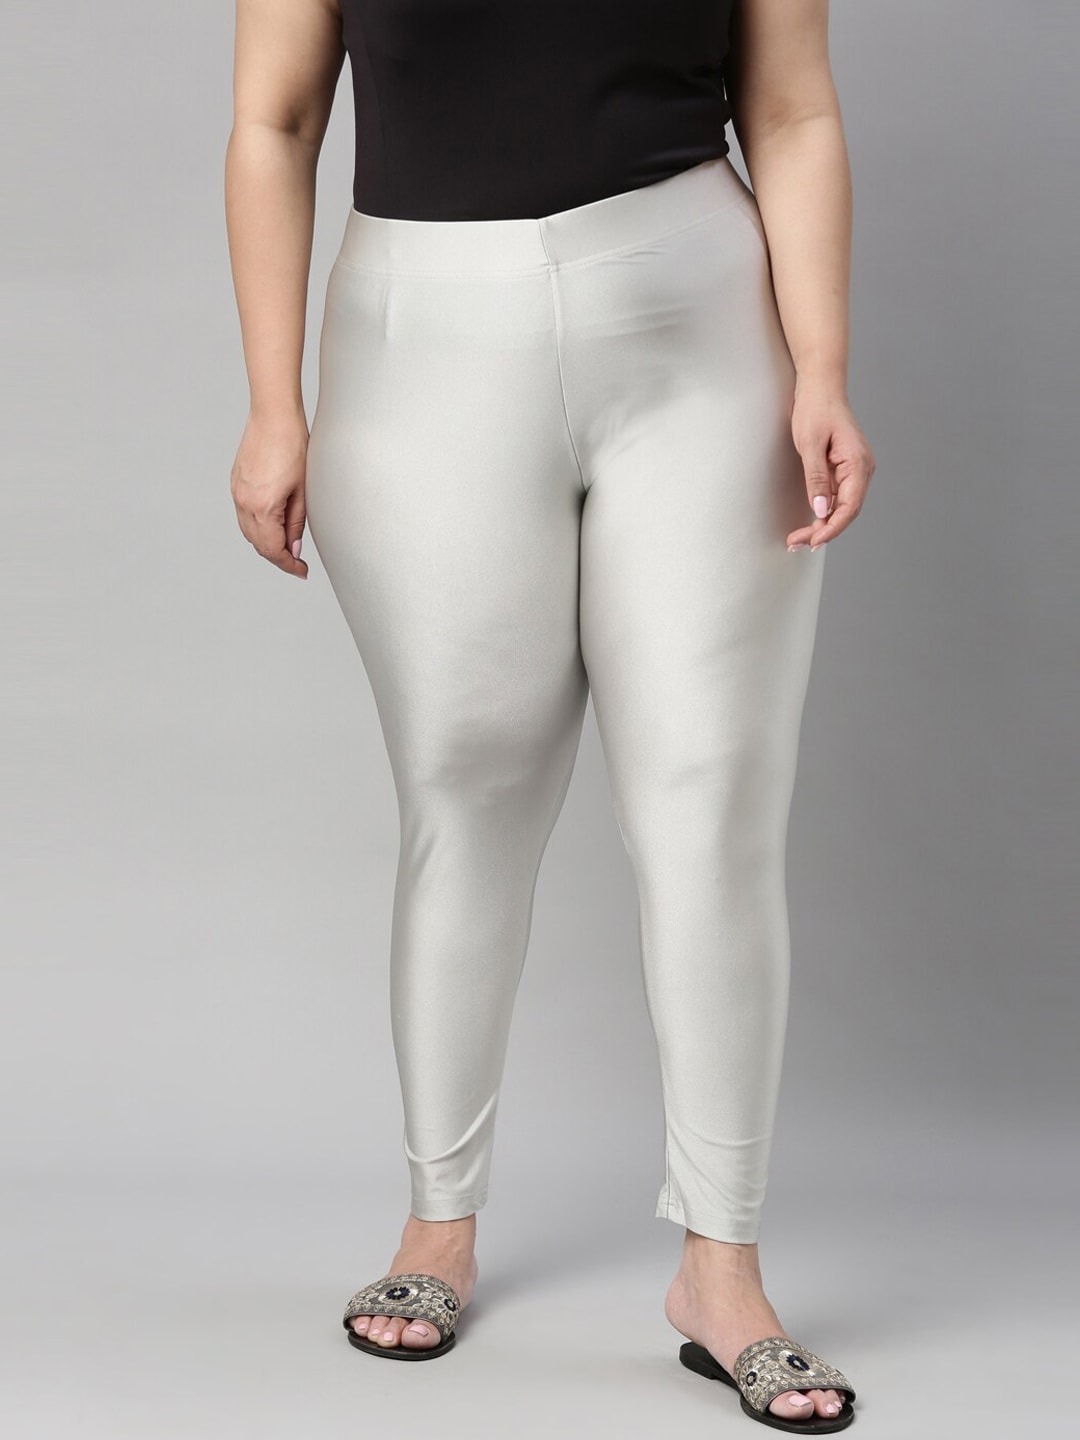 Go Colors Women Silver-Colored Solid Ankle-Length Leggings Price in India,  Full Specifications & Offers